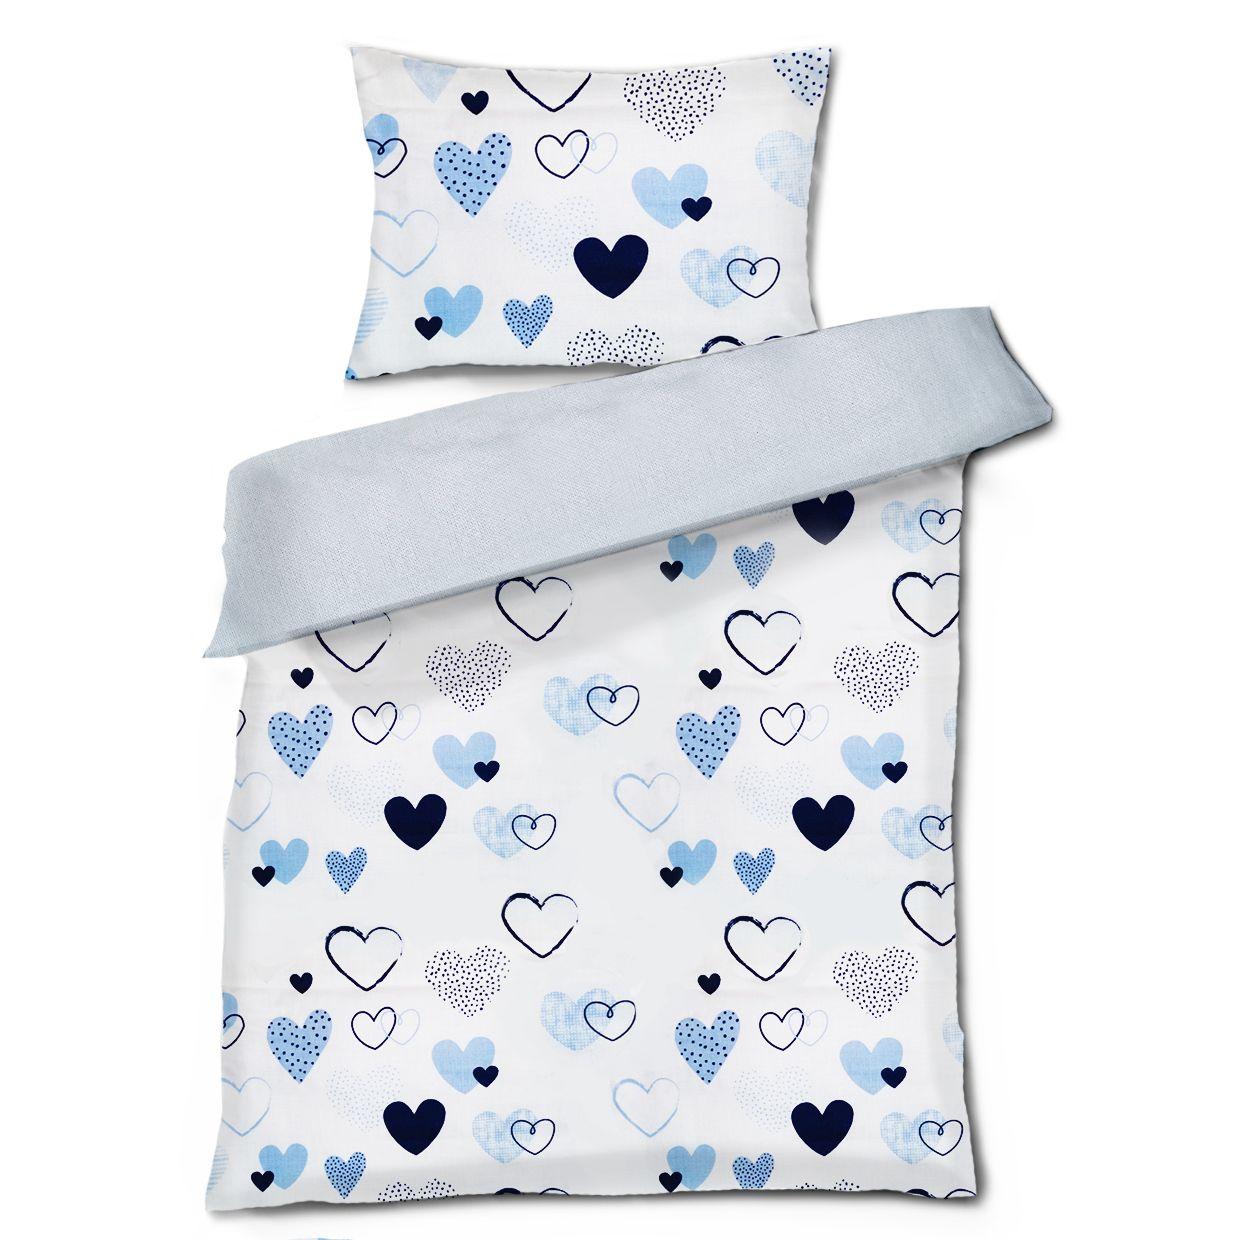 Stroller set 3in1 - blue hearts, POLISH PRODUCT 100% COTTON